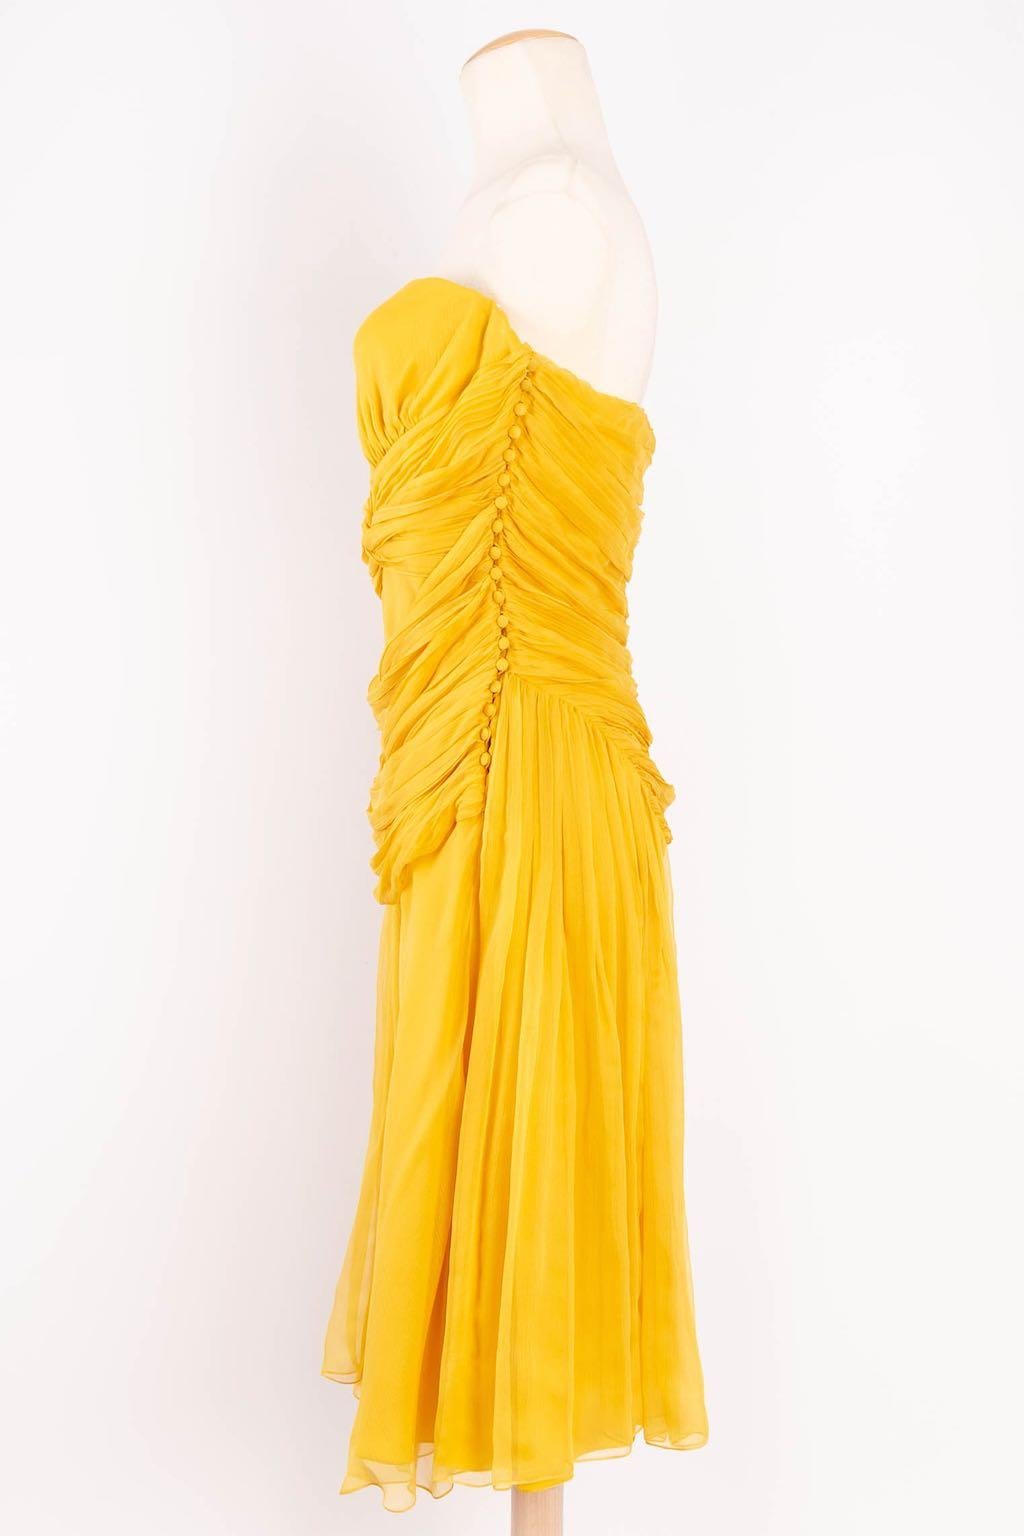 John Galliano (Made in France) Bustier dress composed of yellow silk chiffon. Indicated size 44FR, but it fits a size 40FR.

Additional information: 
Dimensions: Bust: 43 cm ( 16.92